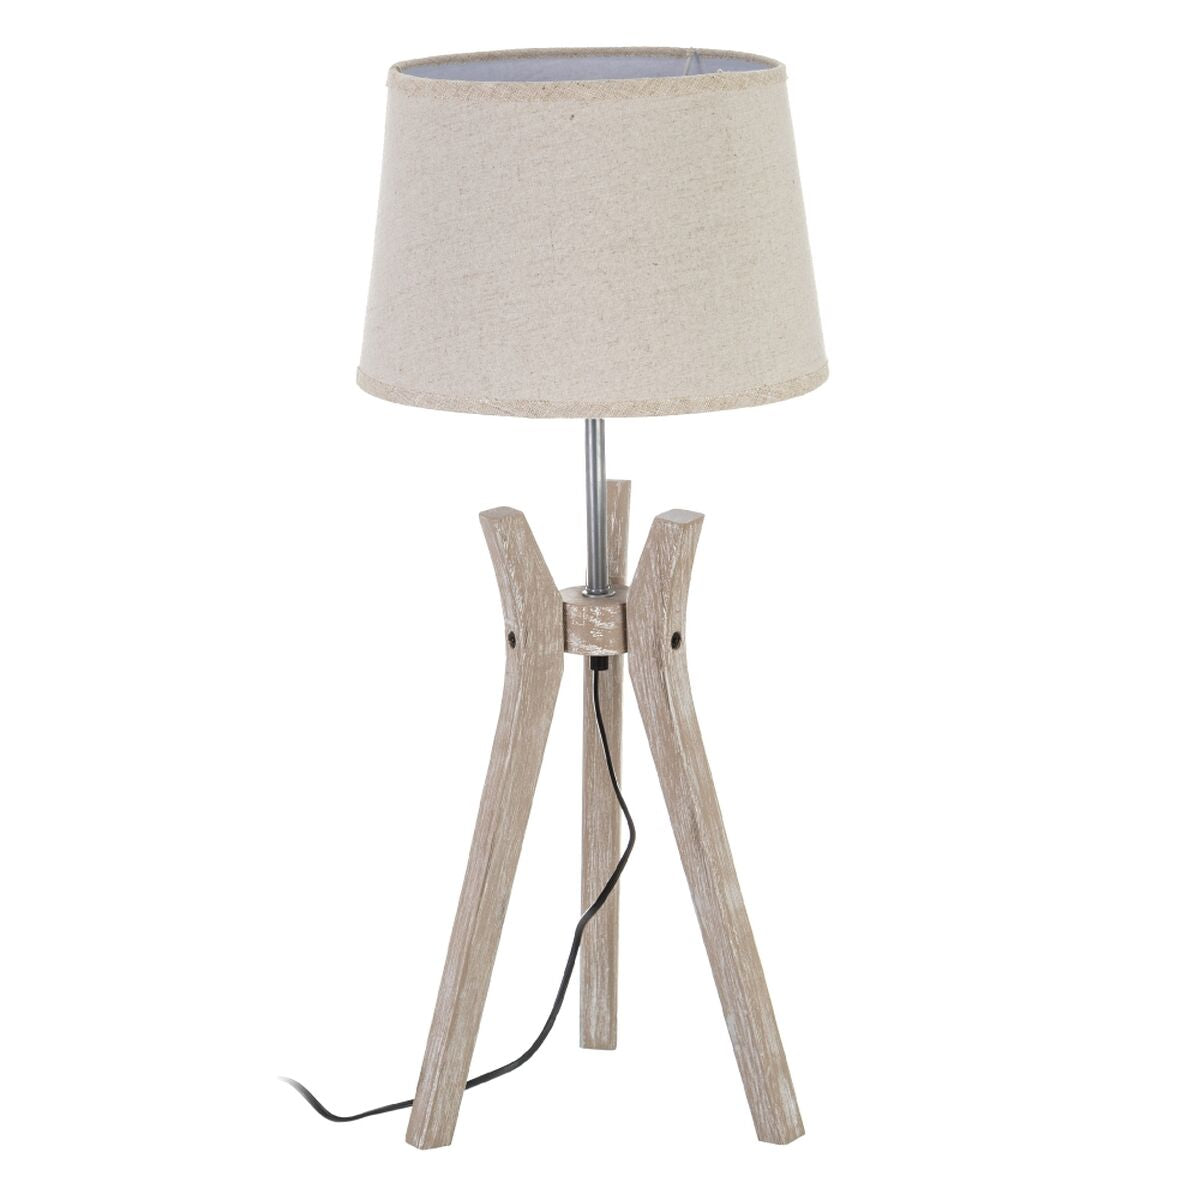 Table lamp with Wooden support (30 x 30 x 69 cm)